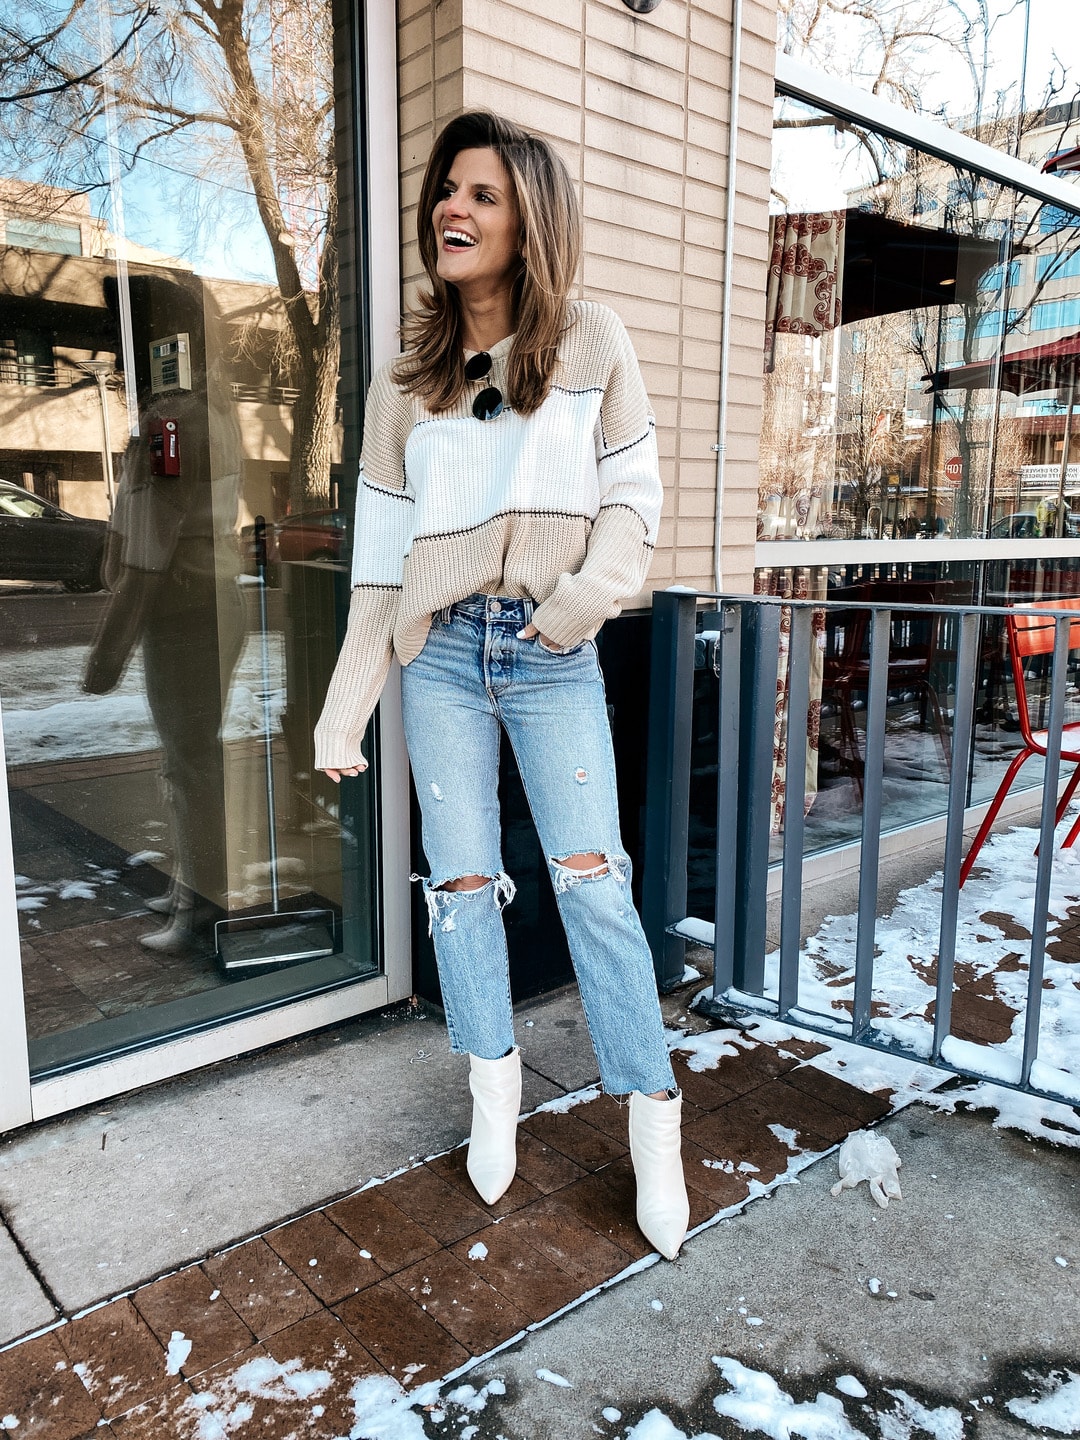 Brighton Keller wearing striped neutral sanctuary sweater, mom jeans and white booties